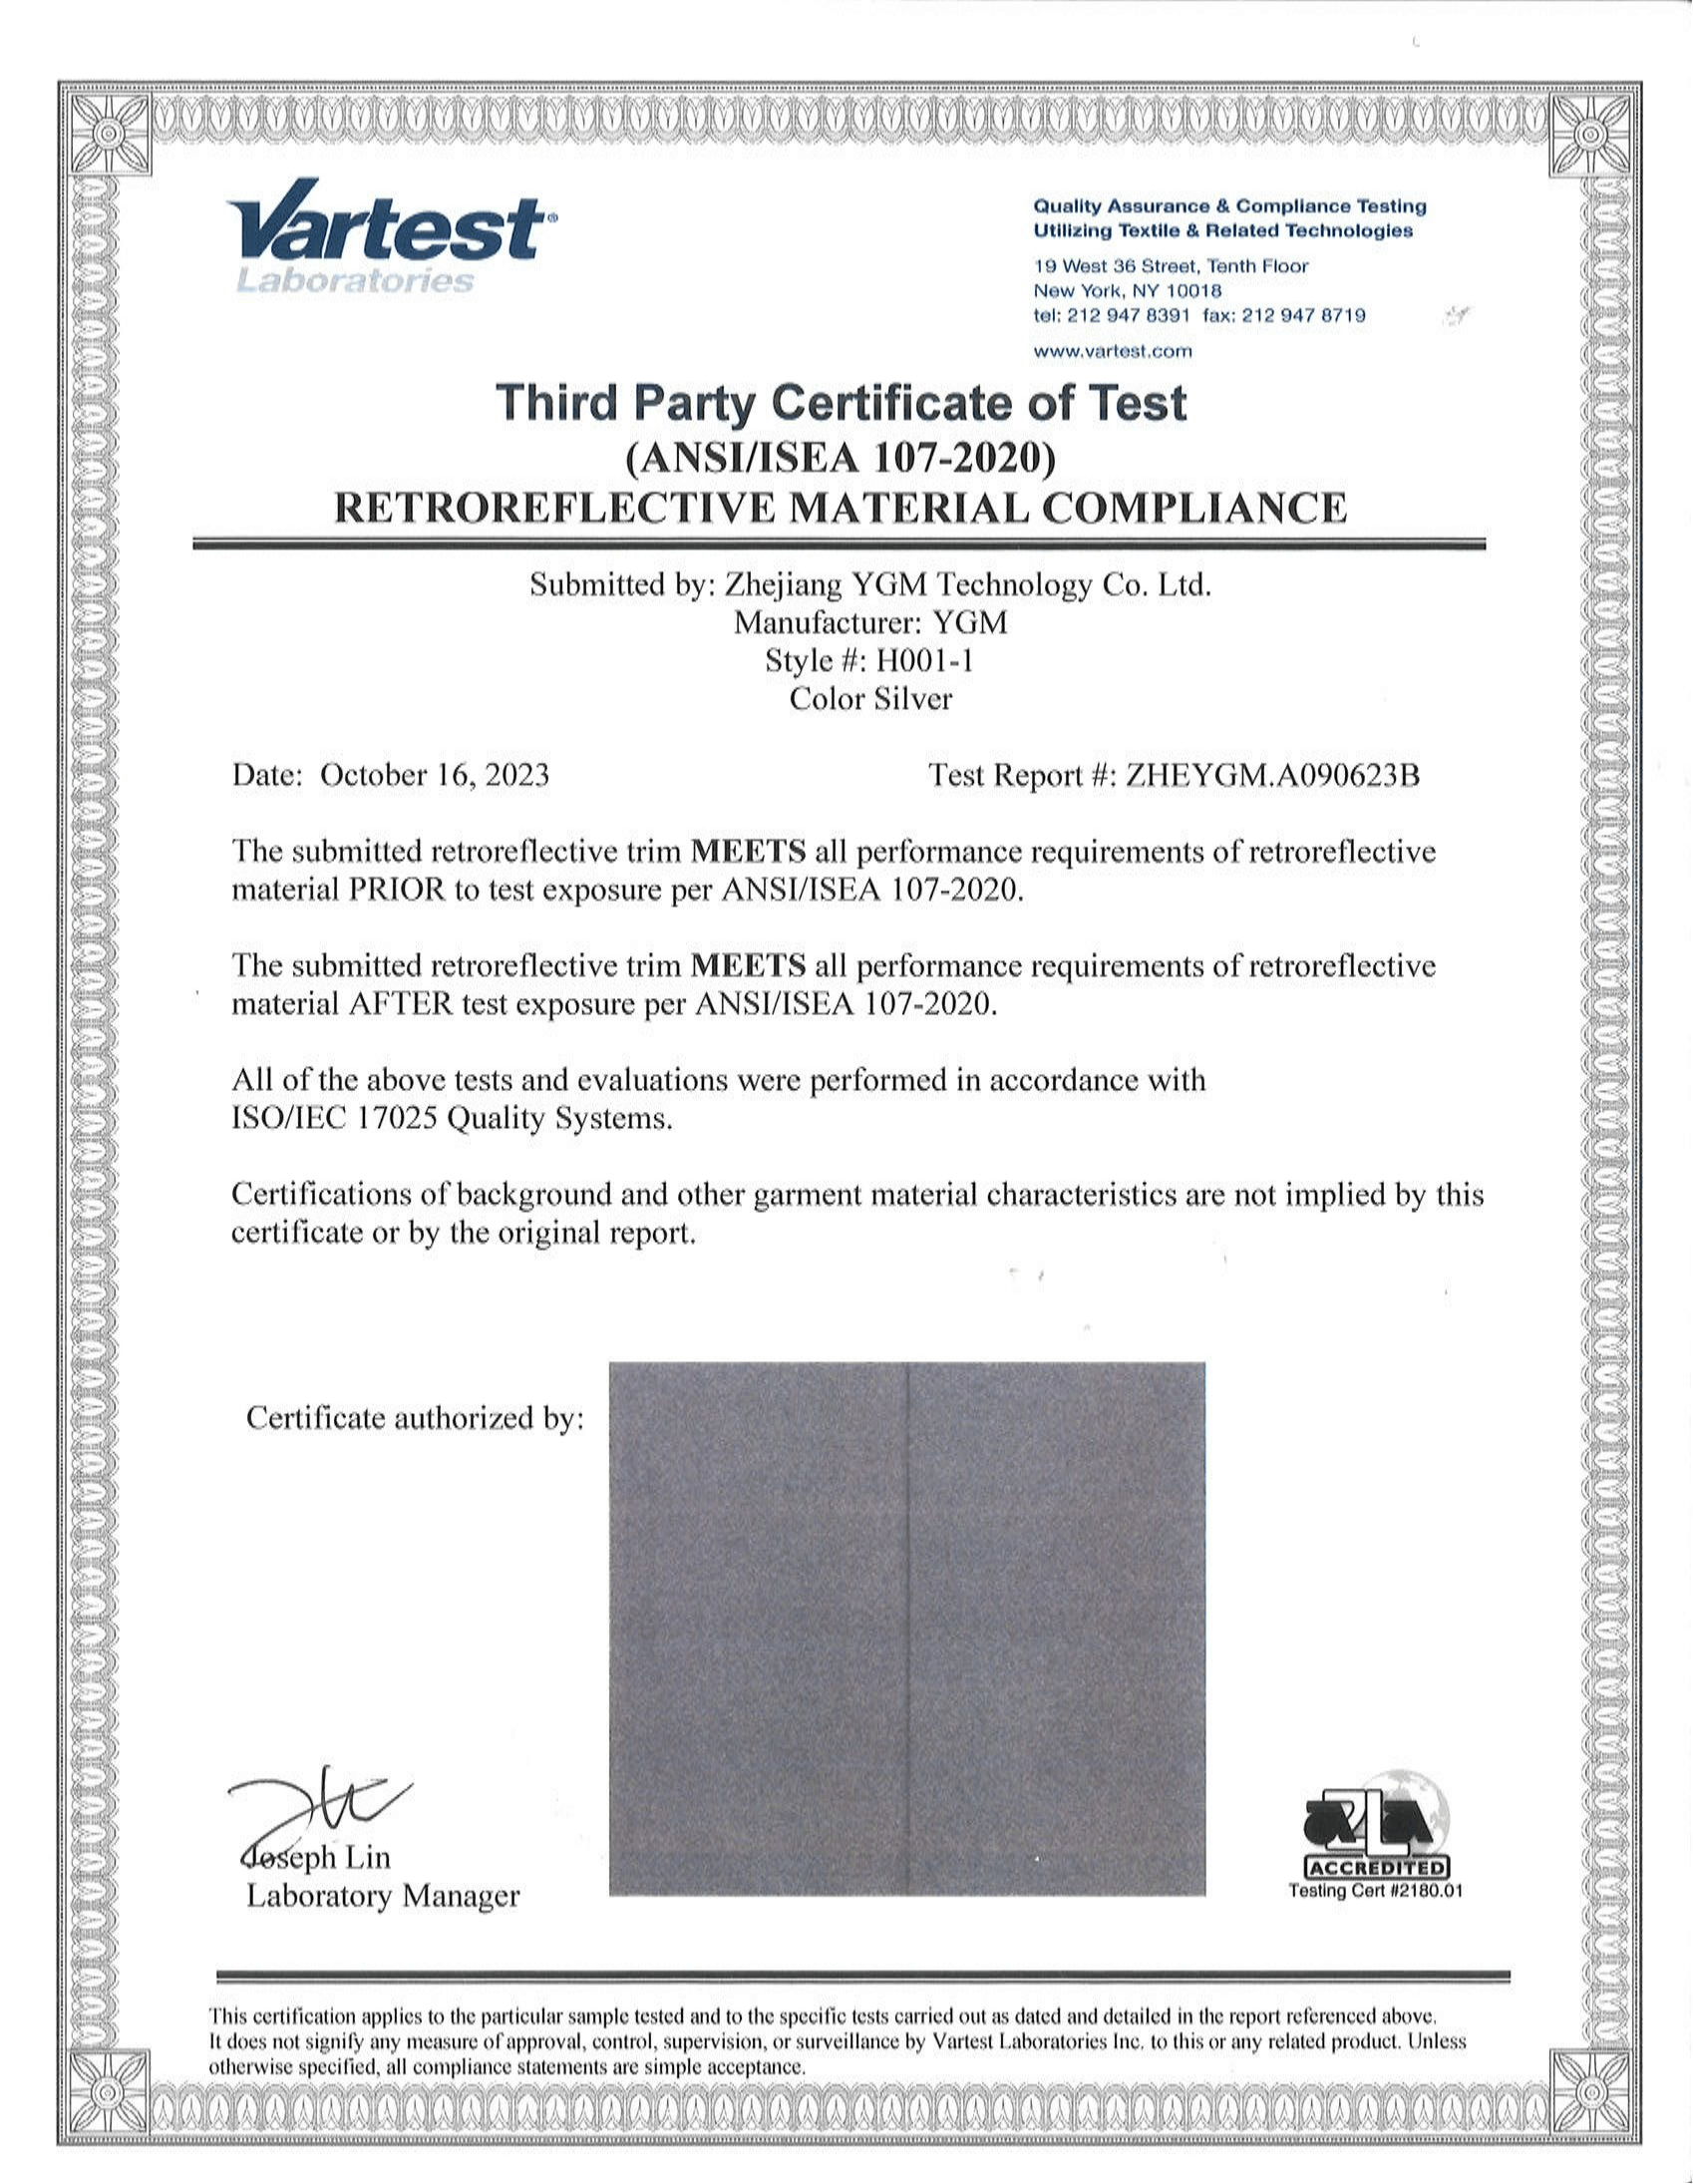 ANSI/ISEA 107 Certificate & Test Report for H001-1 Product